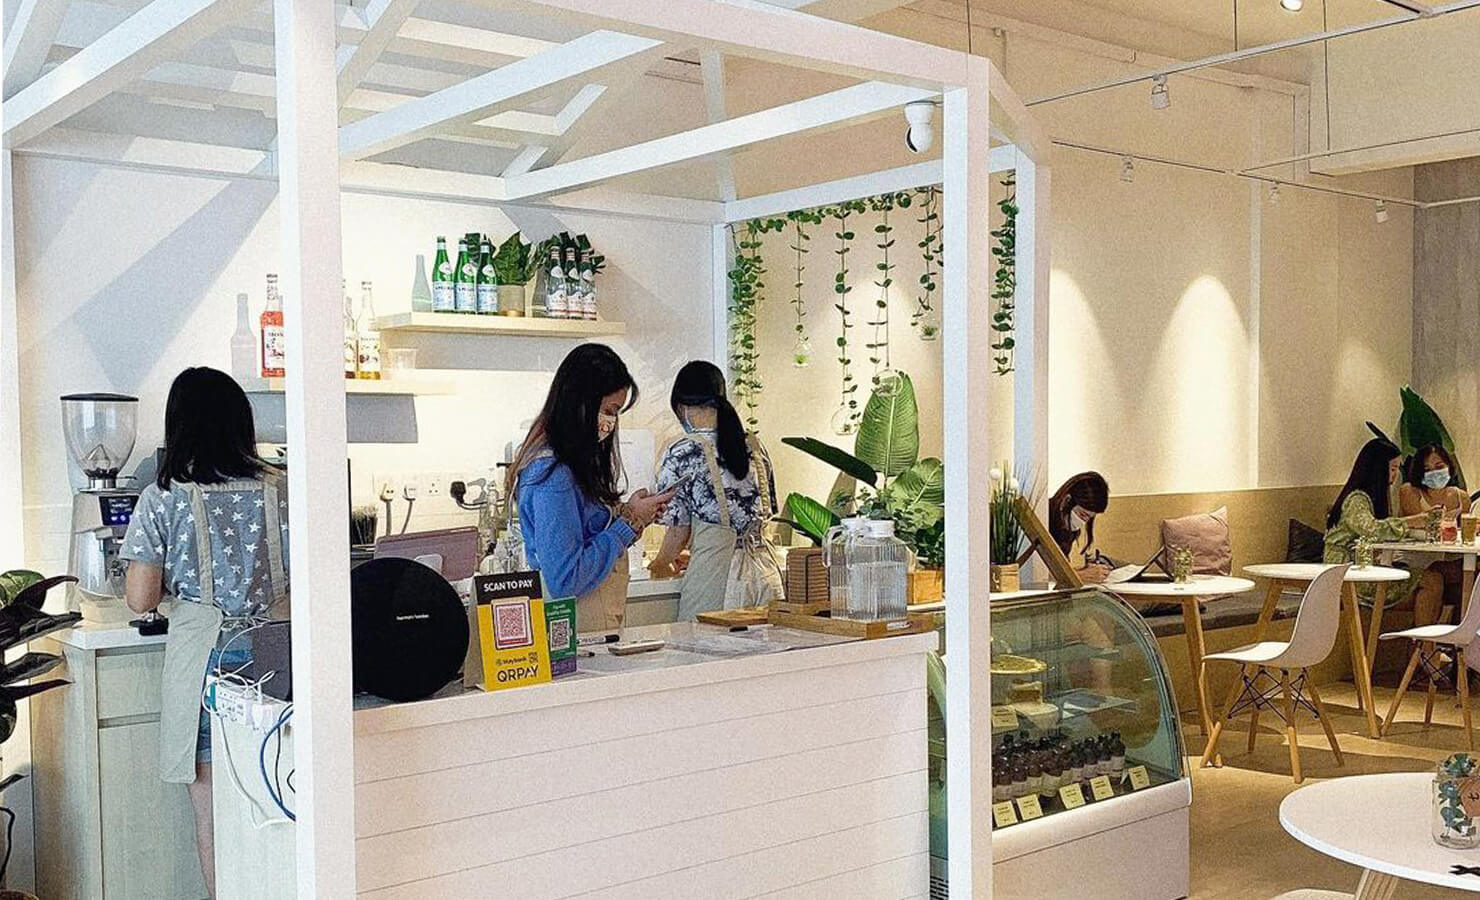 bloomthis-5-plant-flower-cafes-you-have-to-visit-11-cc-by-mel-cafe